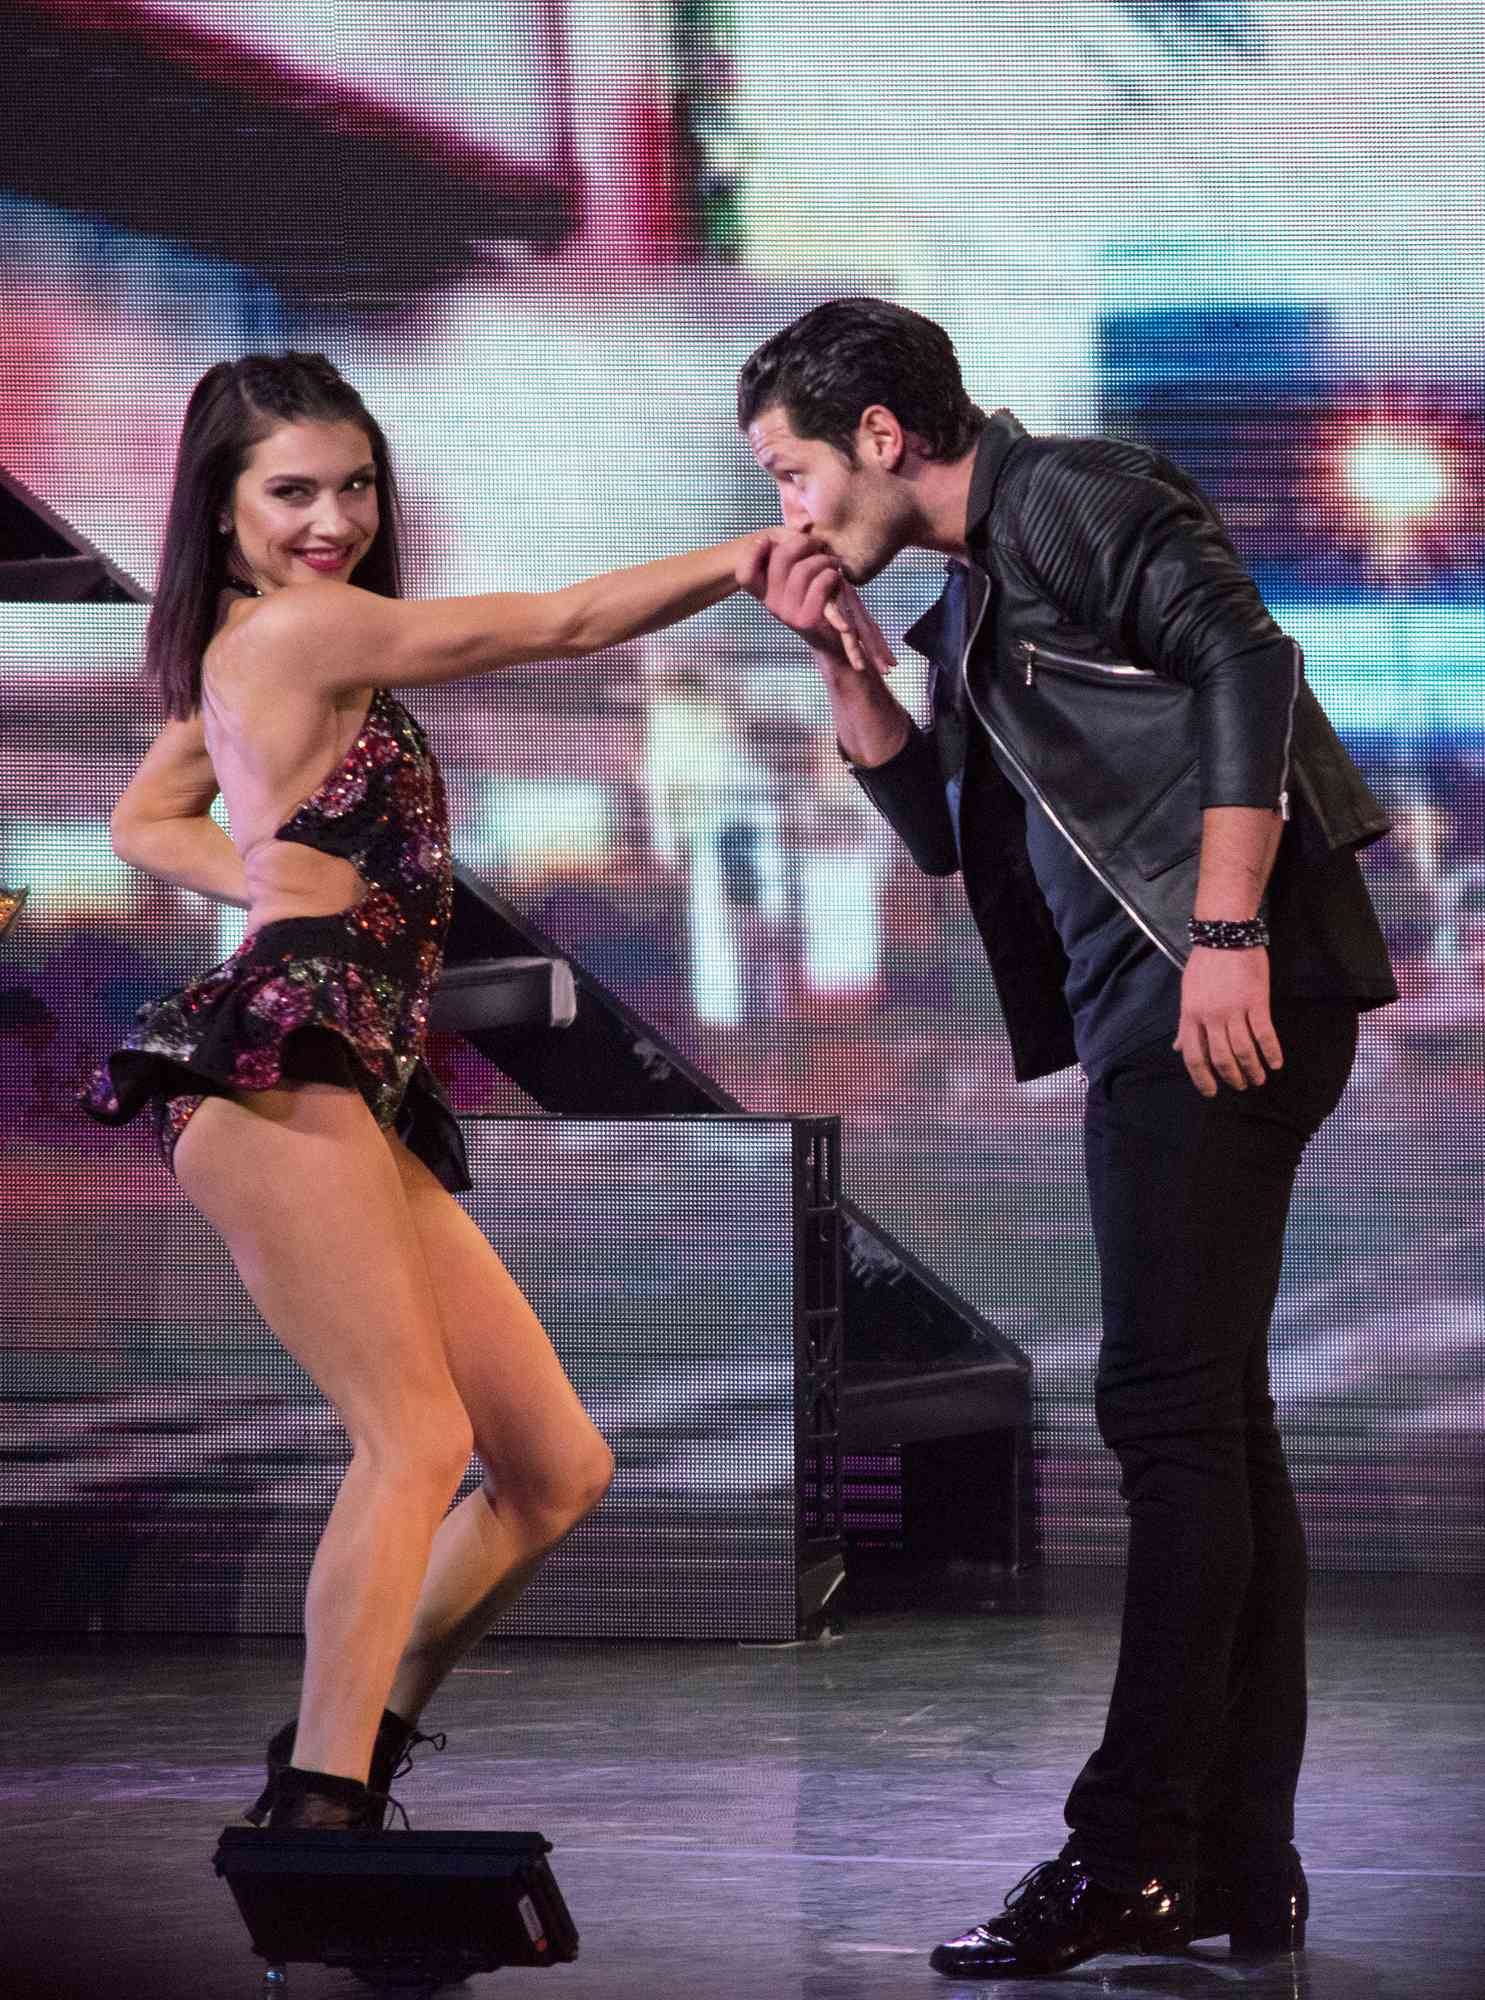 Val Chmerkovskiy and Jenna Johnson of "Dancing with the Stars" perform onstage at Von Braun Center on December 19, 2018 in Huntsville, Alabama.